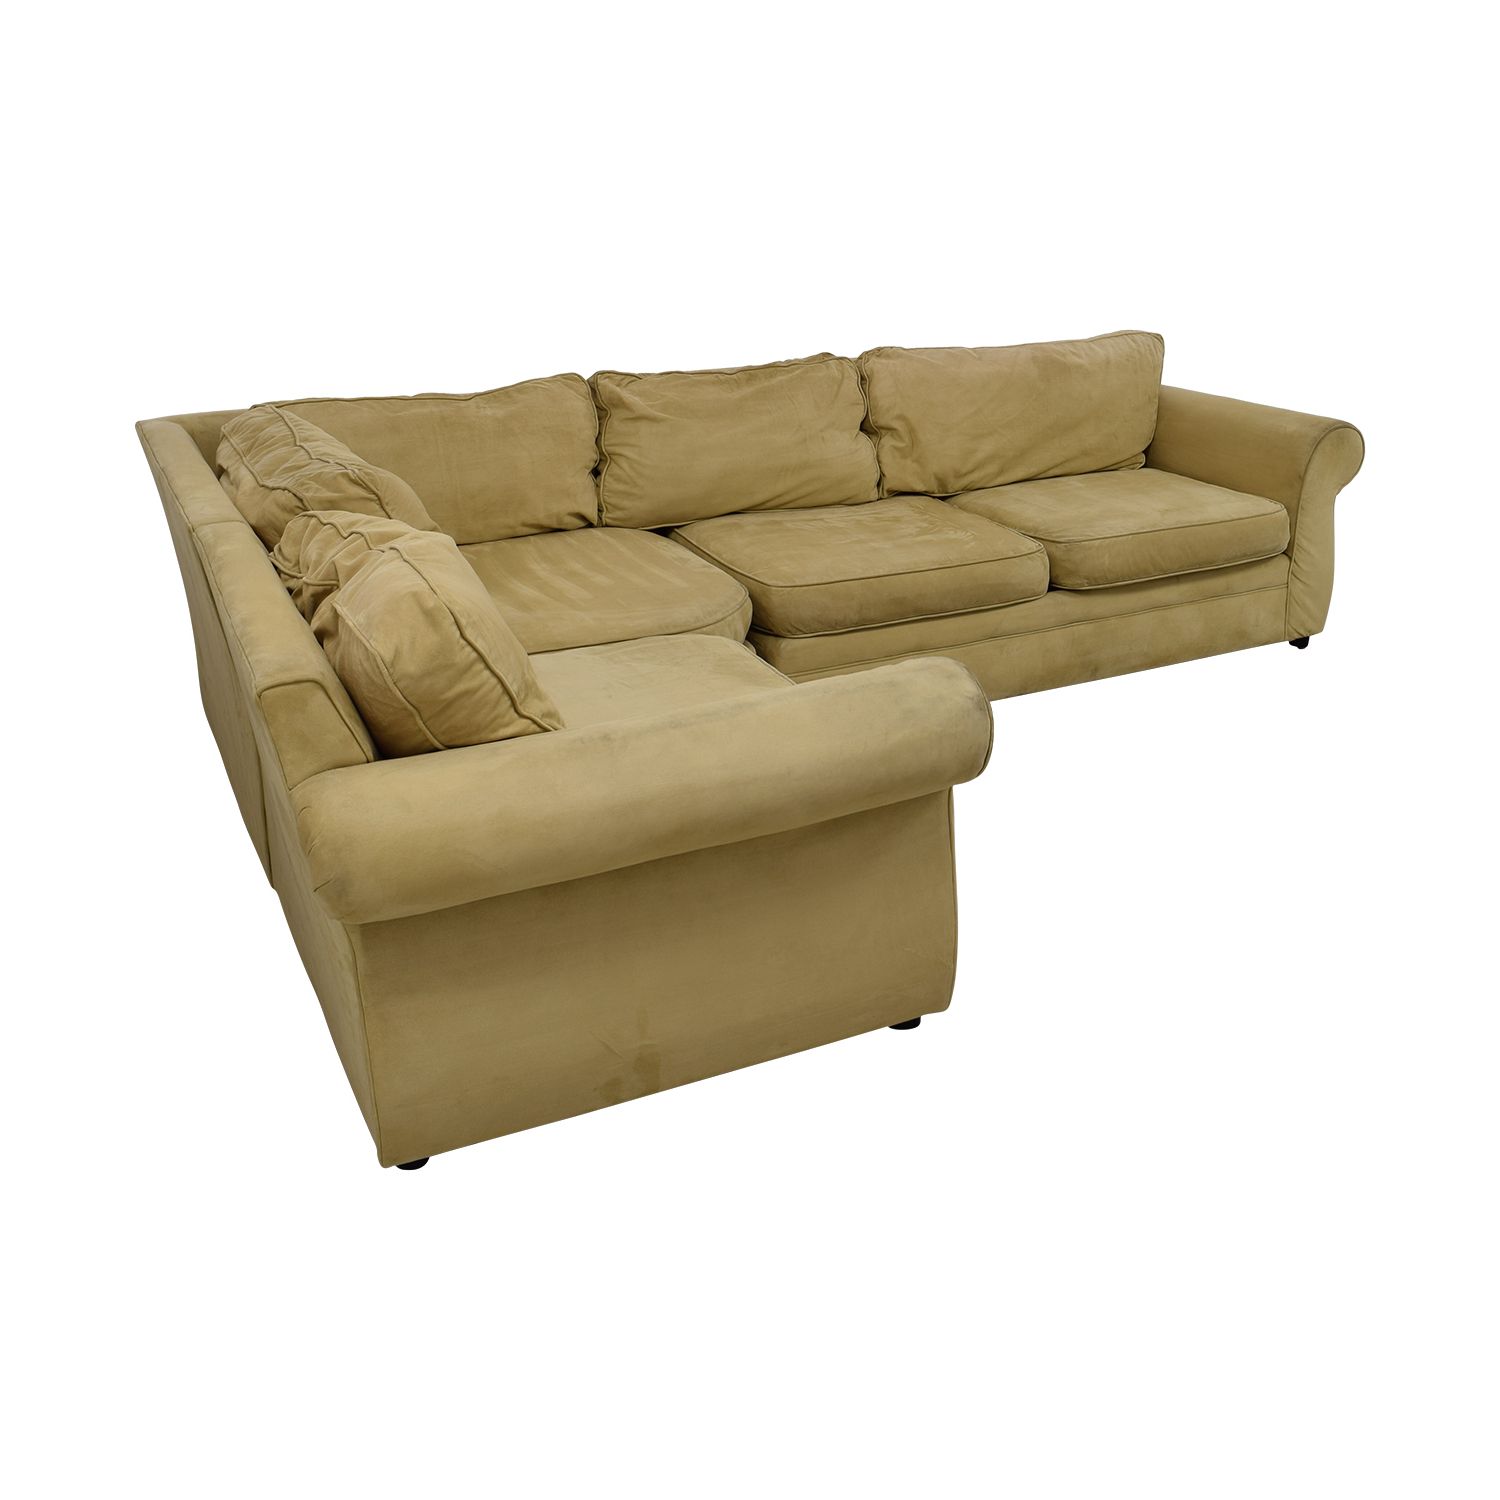 [%90% Off – Pottery Barn Pottery Barn Beige L Shaped Sectional / Sofas Throughout 2018 Beige L Shaped Sectional Sofas|beige L Shaped Sectional Sofas Inside Latest 90% Off – Pottery Barn Pottery Barn Beige L Shaped Sectional / Sofas|well Known Beige L Shaped Sectional Sofas For 90% Off – Pottery Barn Pottery Barn Beige L Shaped Sectional / Sofas|best And Newest 90% Off – Pottery Barn Pottery Barn Beige L Shaped Sectional / Sofas Regarding Beige L Shaped Sectional Sofas%] (View 12 of 15)